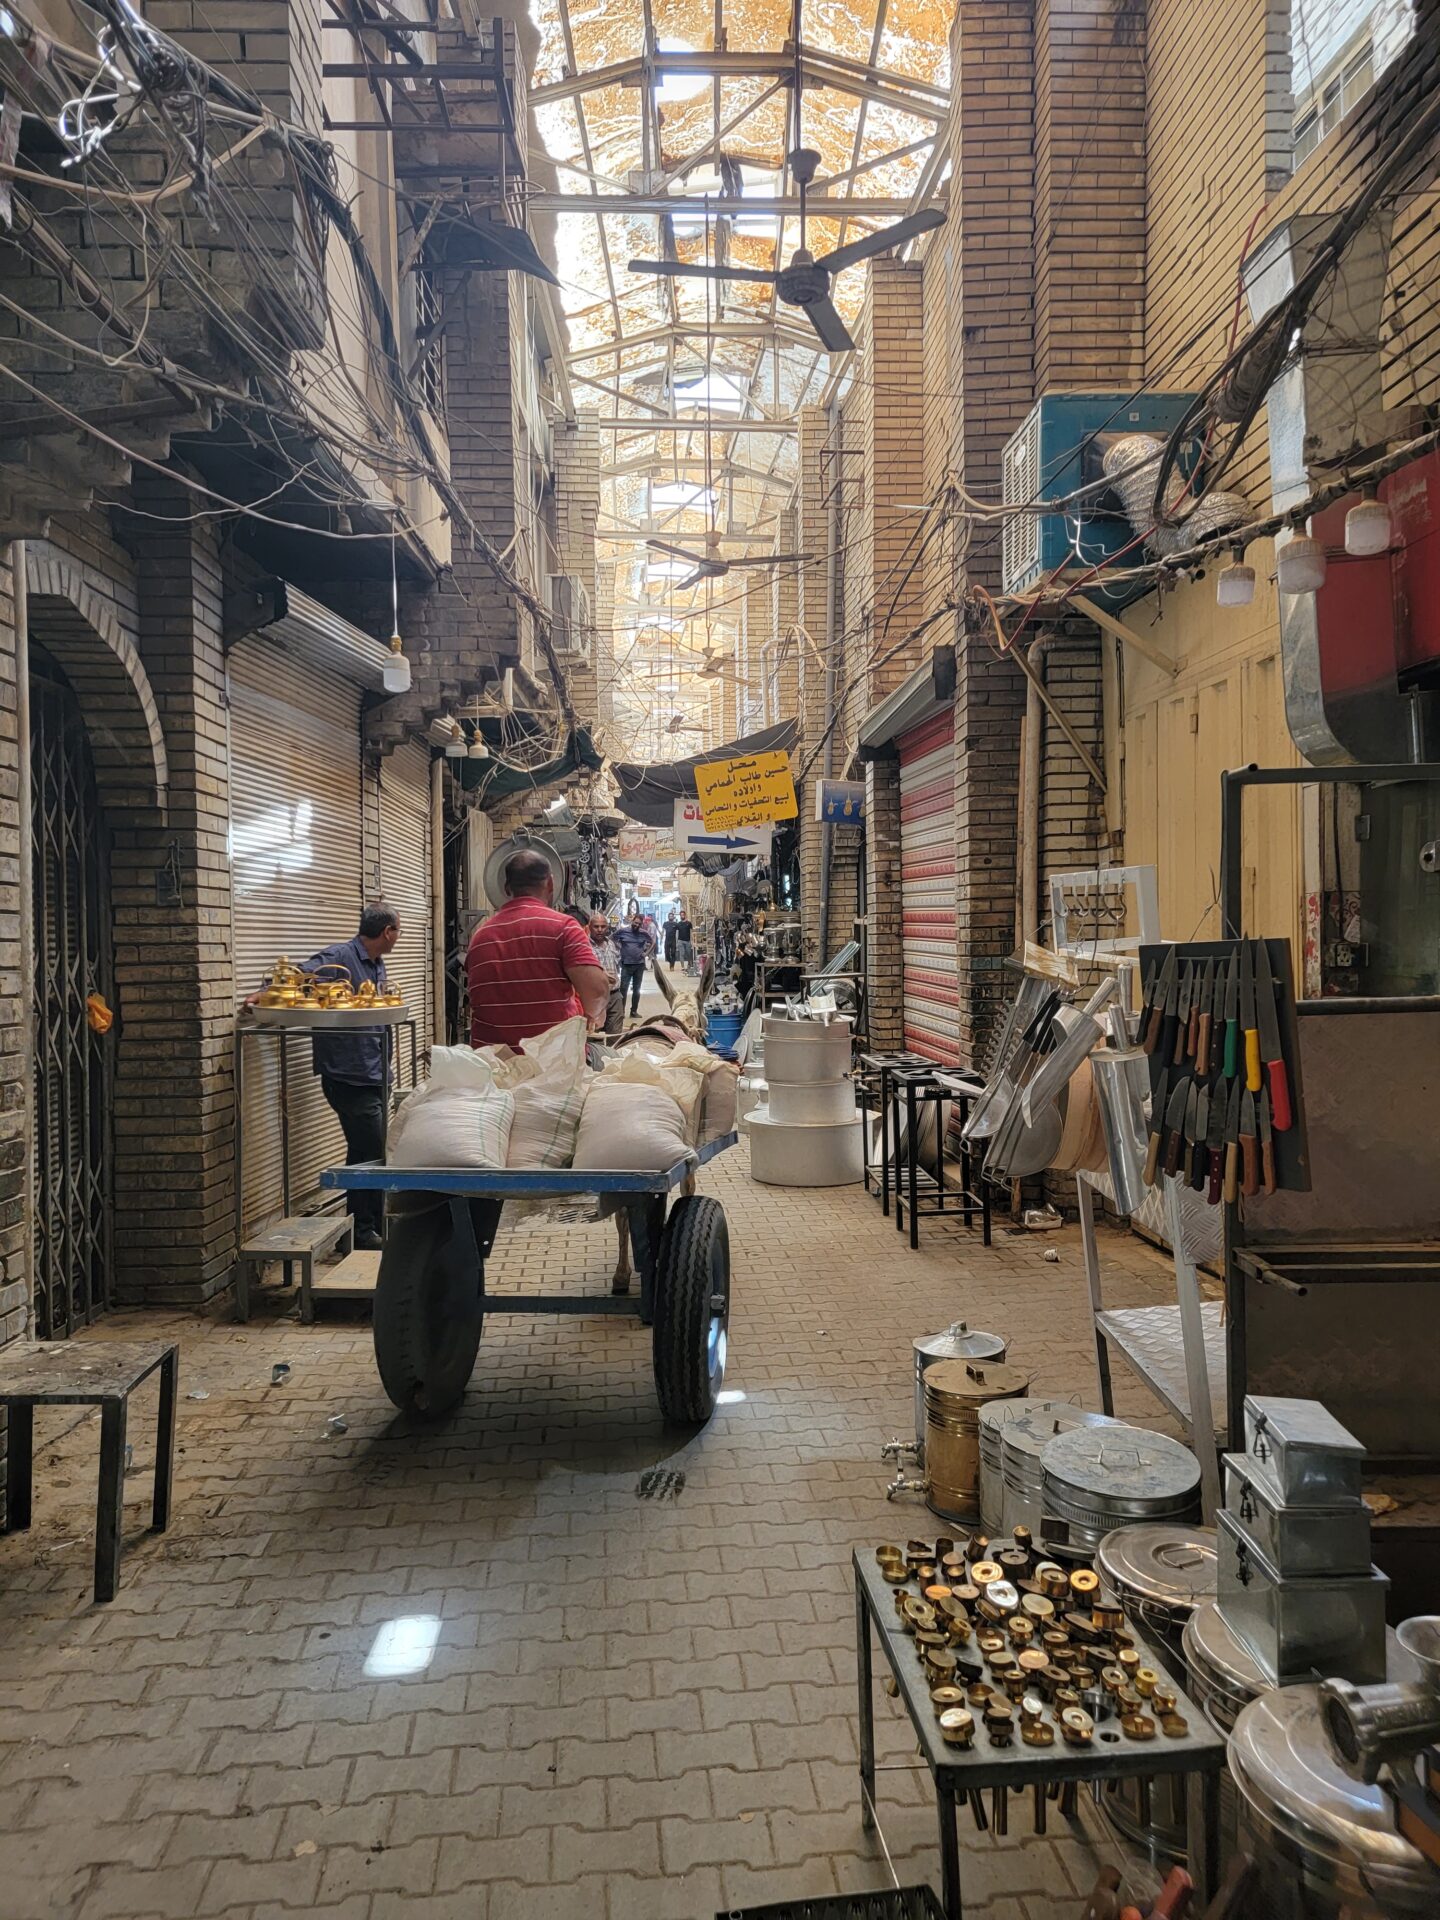 a man pushing a cart in a brick alley